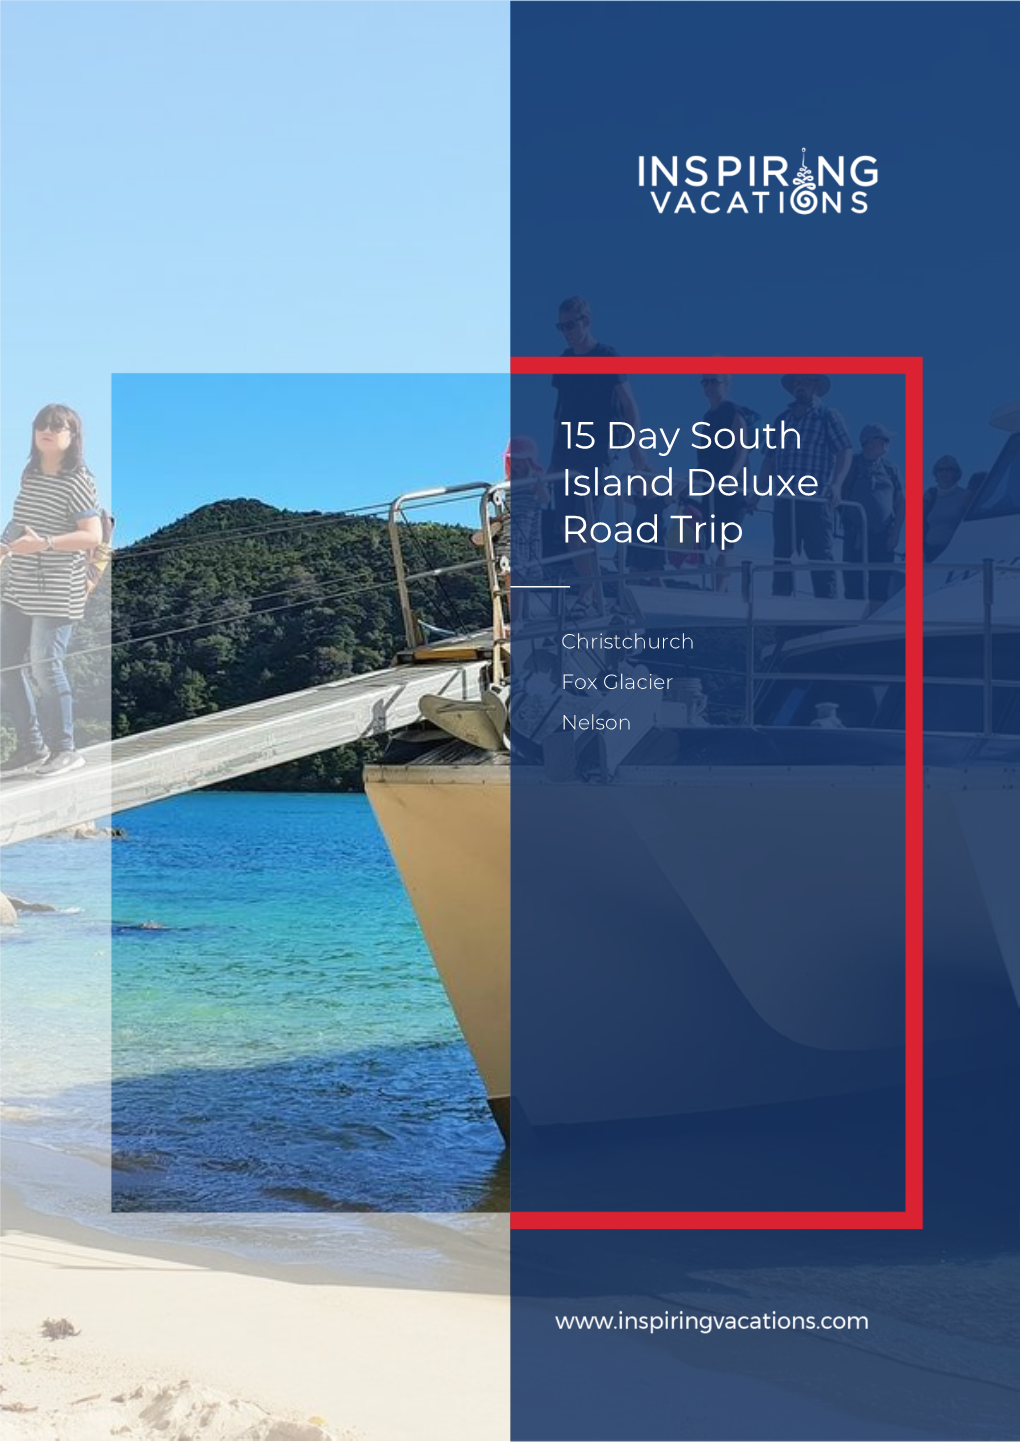 15 Day South Island Deluxe Road Trip